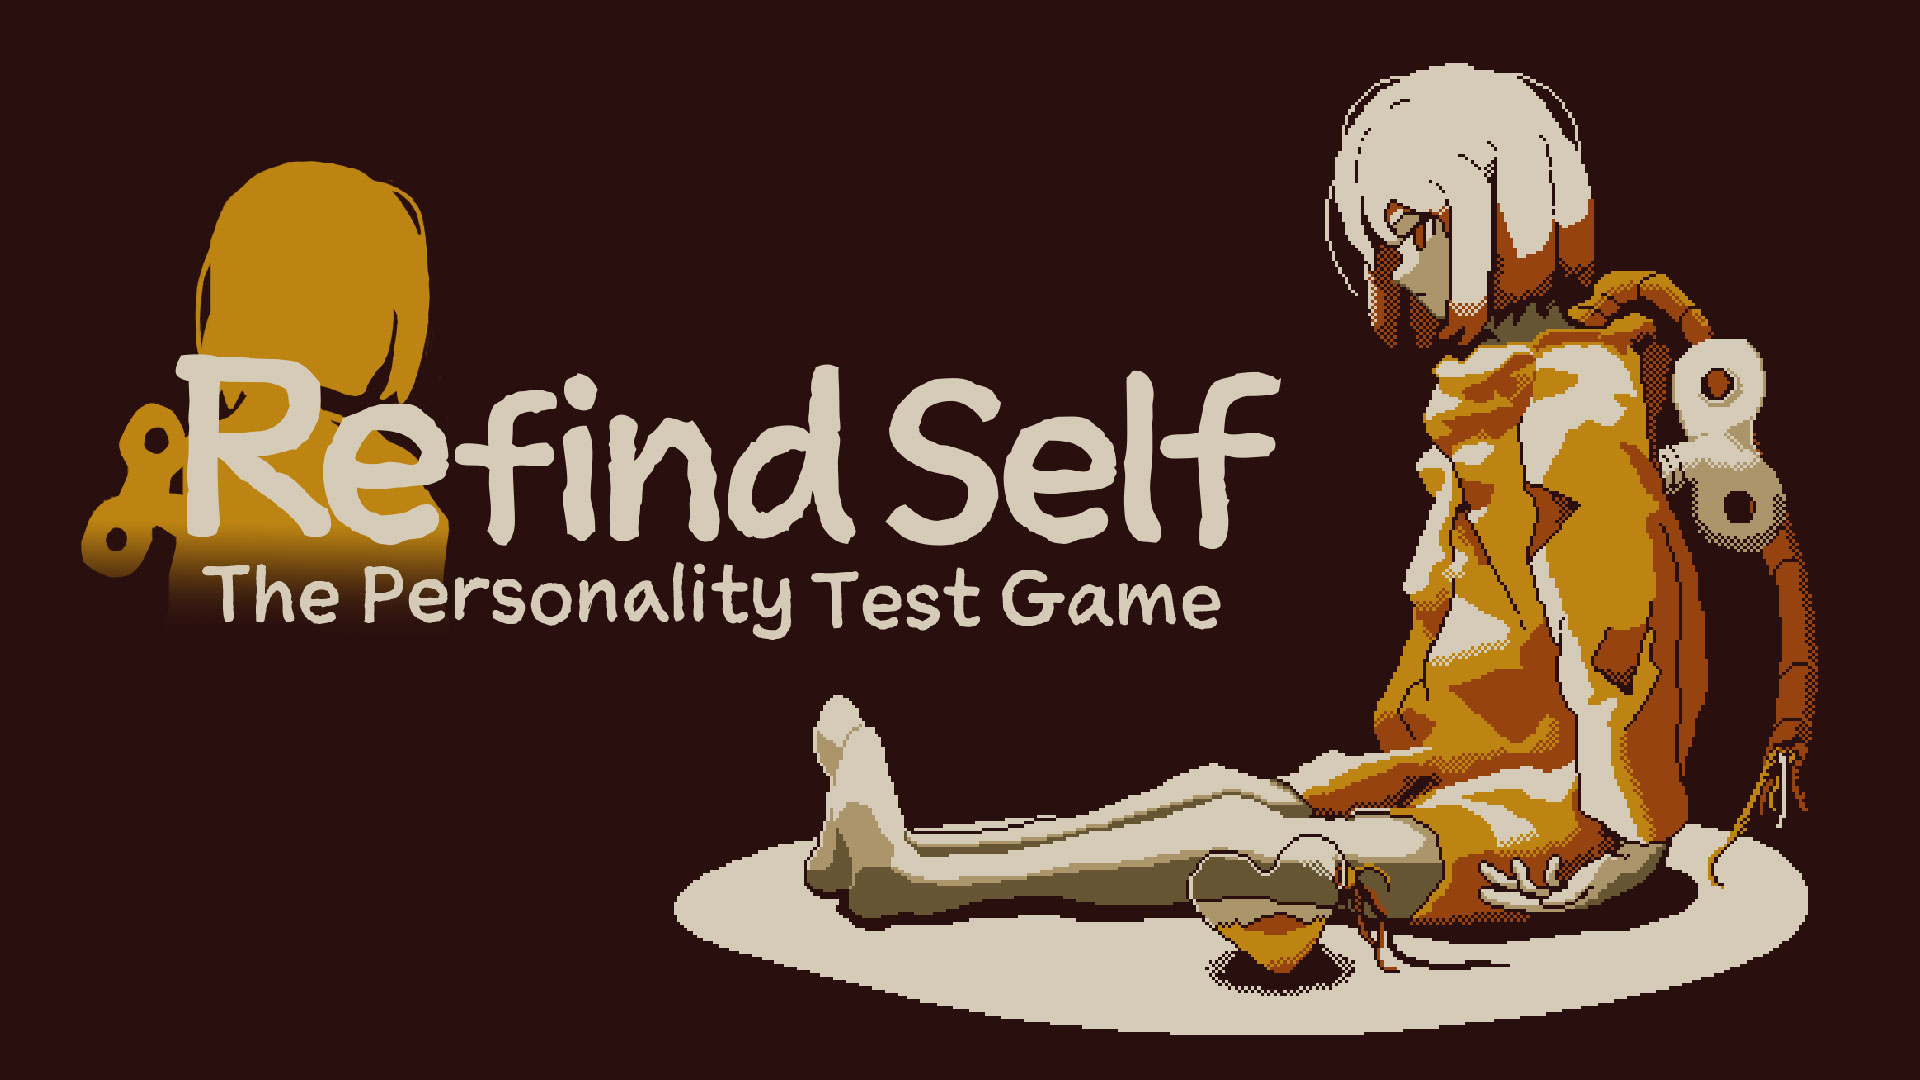 Refind Self: The Personality Test Game from Lizardry and PLAYISM